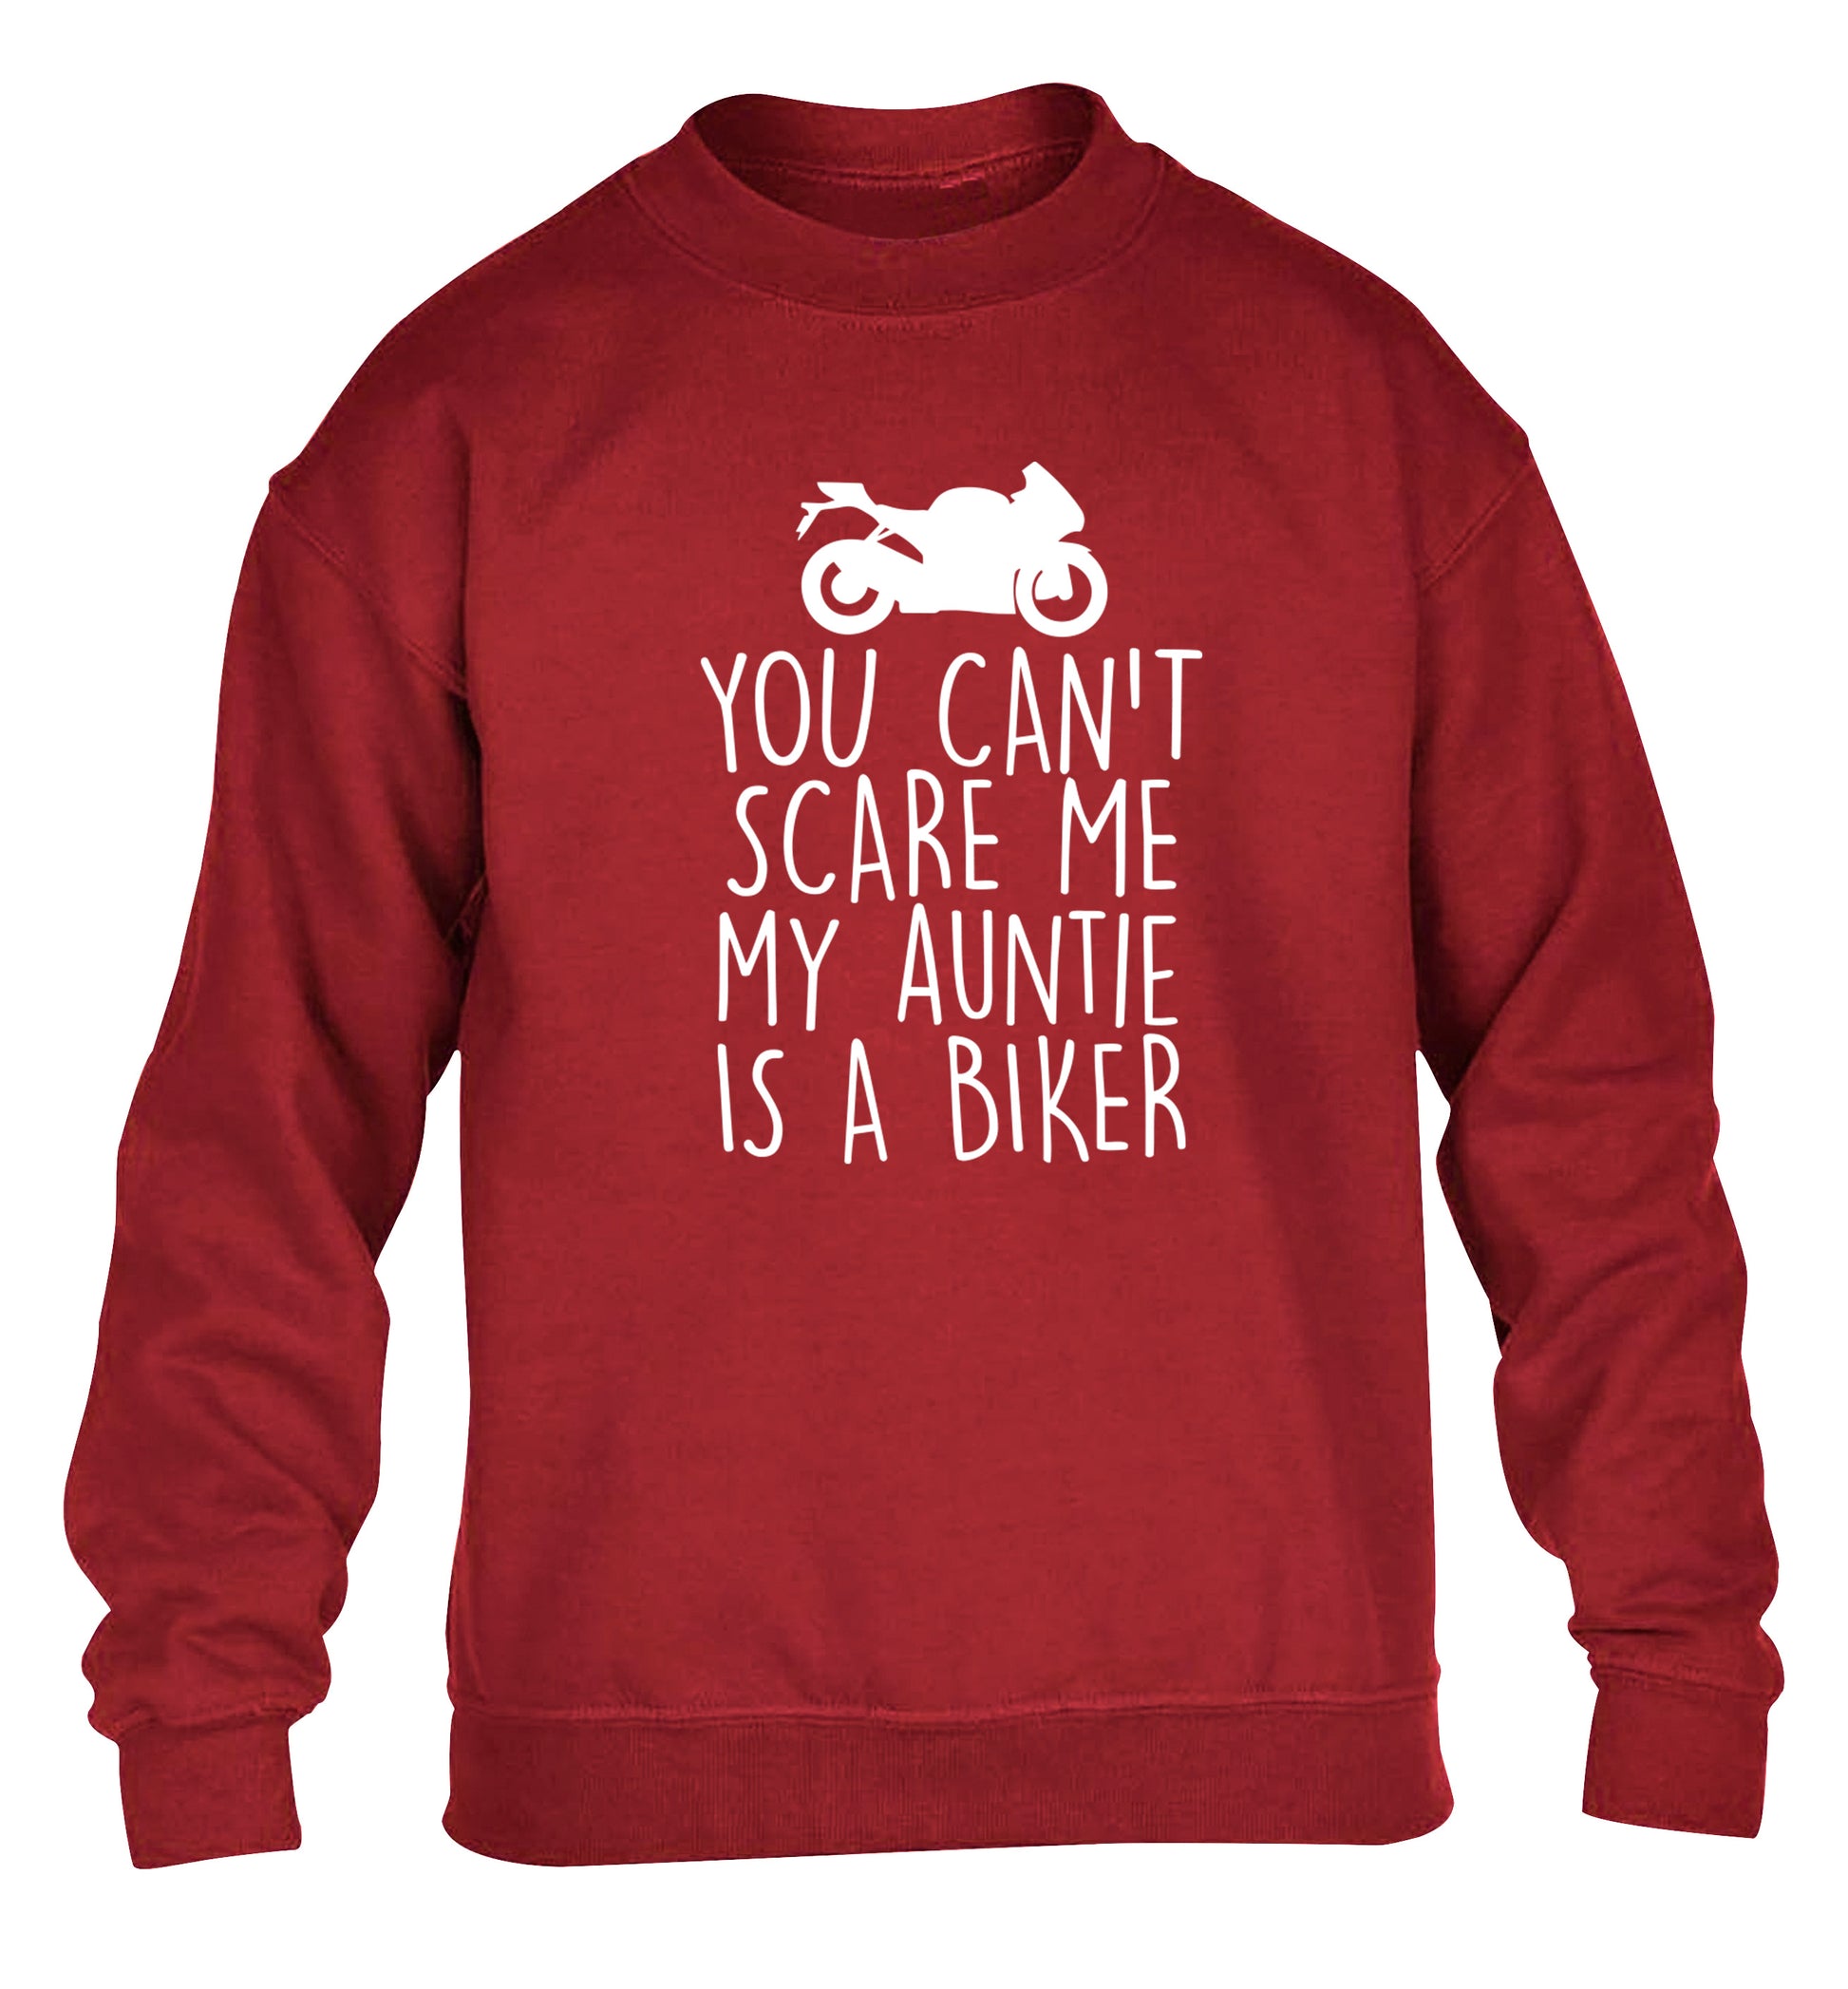 You can't scare me my auntie is a biker children's grey sweater 12-13 Years